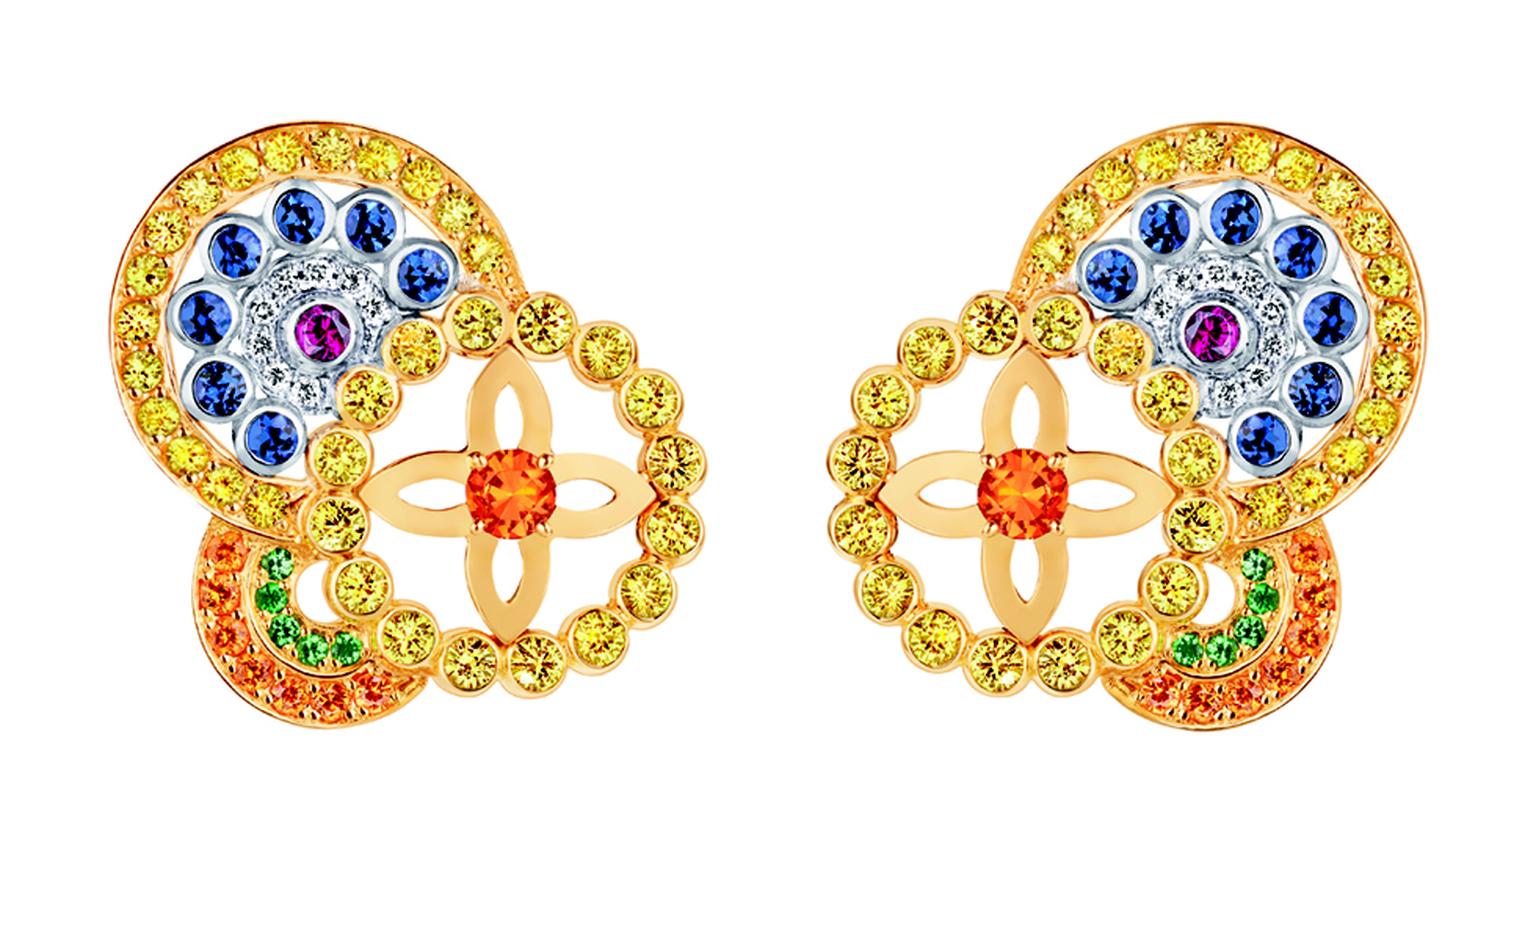 LOUIS VUITTON, Ornament Tribal Earrings, yellow gold, blue, yellow and pink sapphires, spessartite and tsavorite garnets and diamonds. £10,200